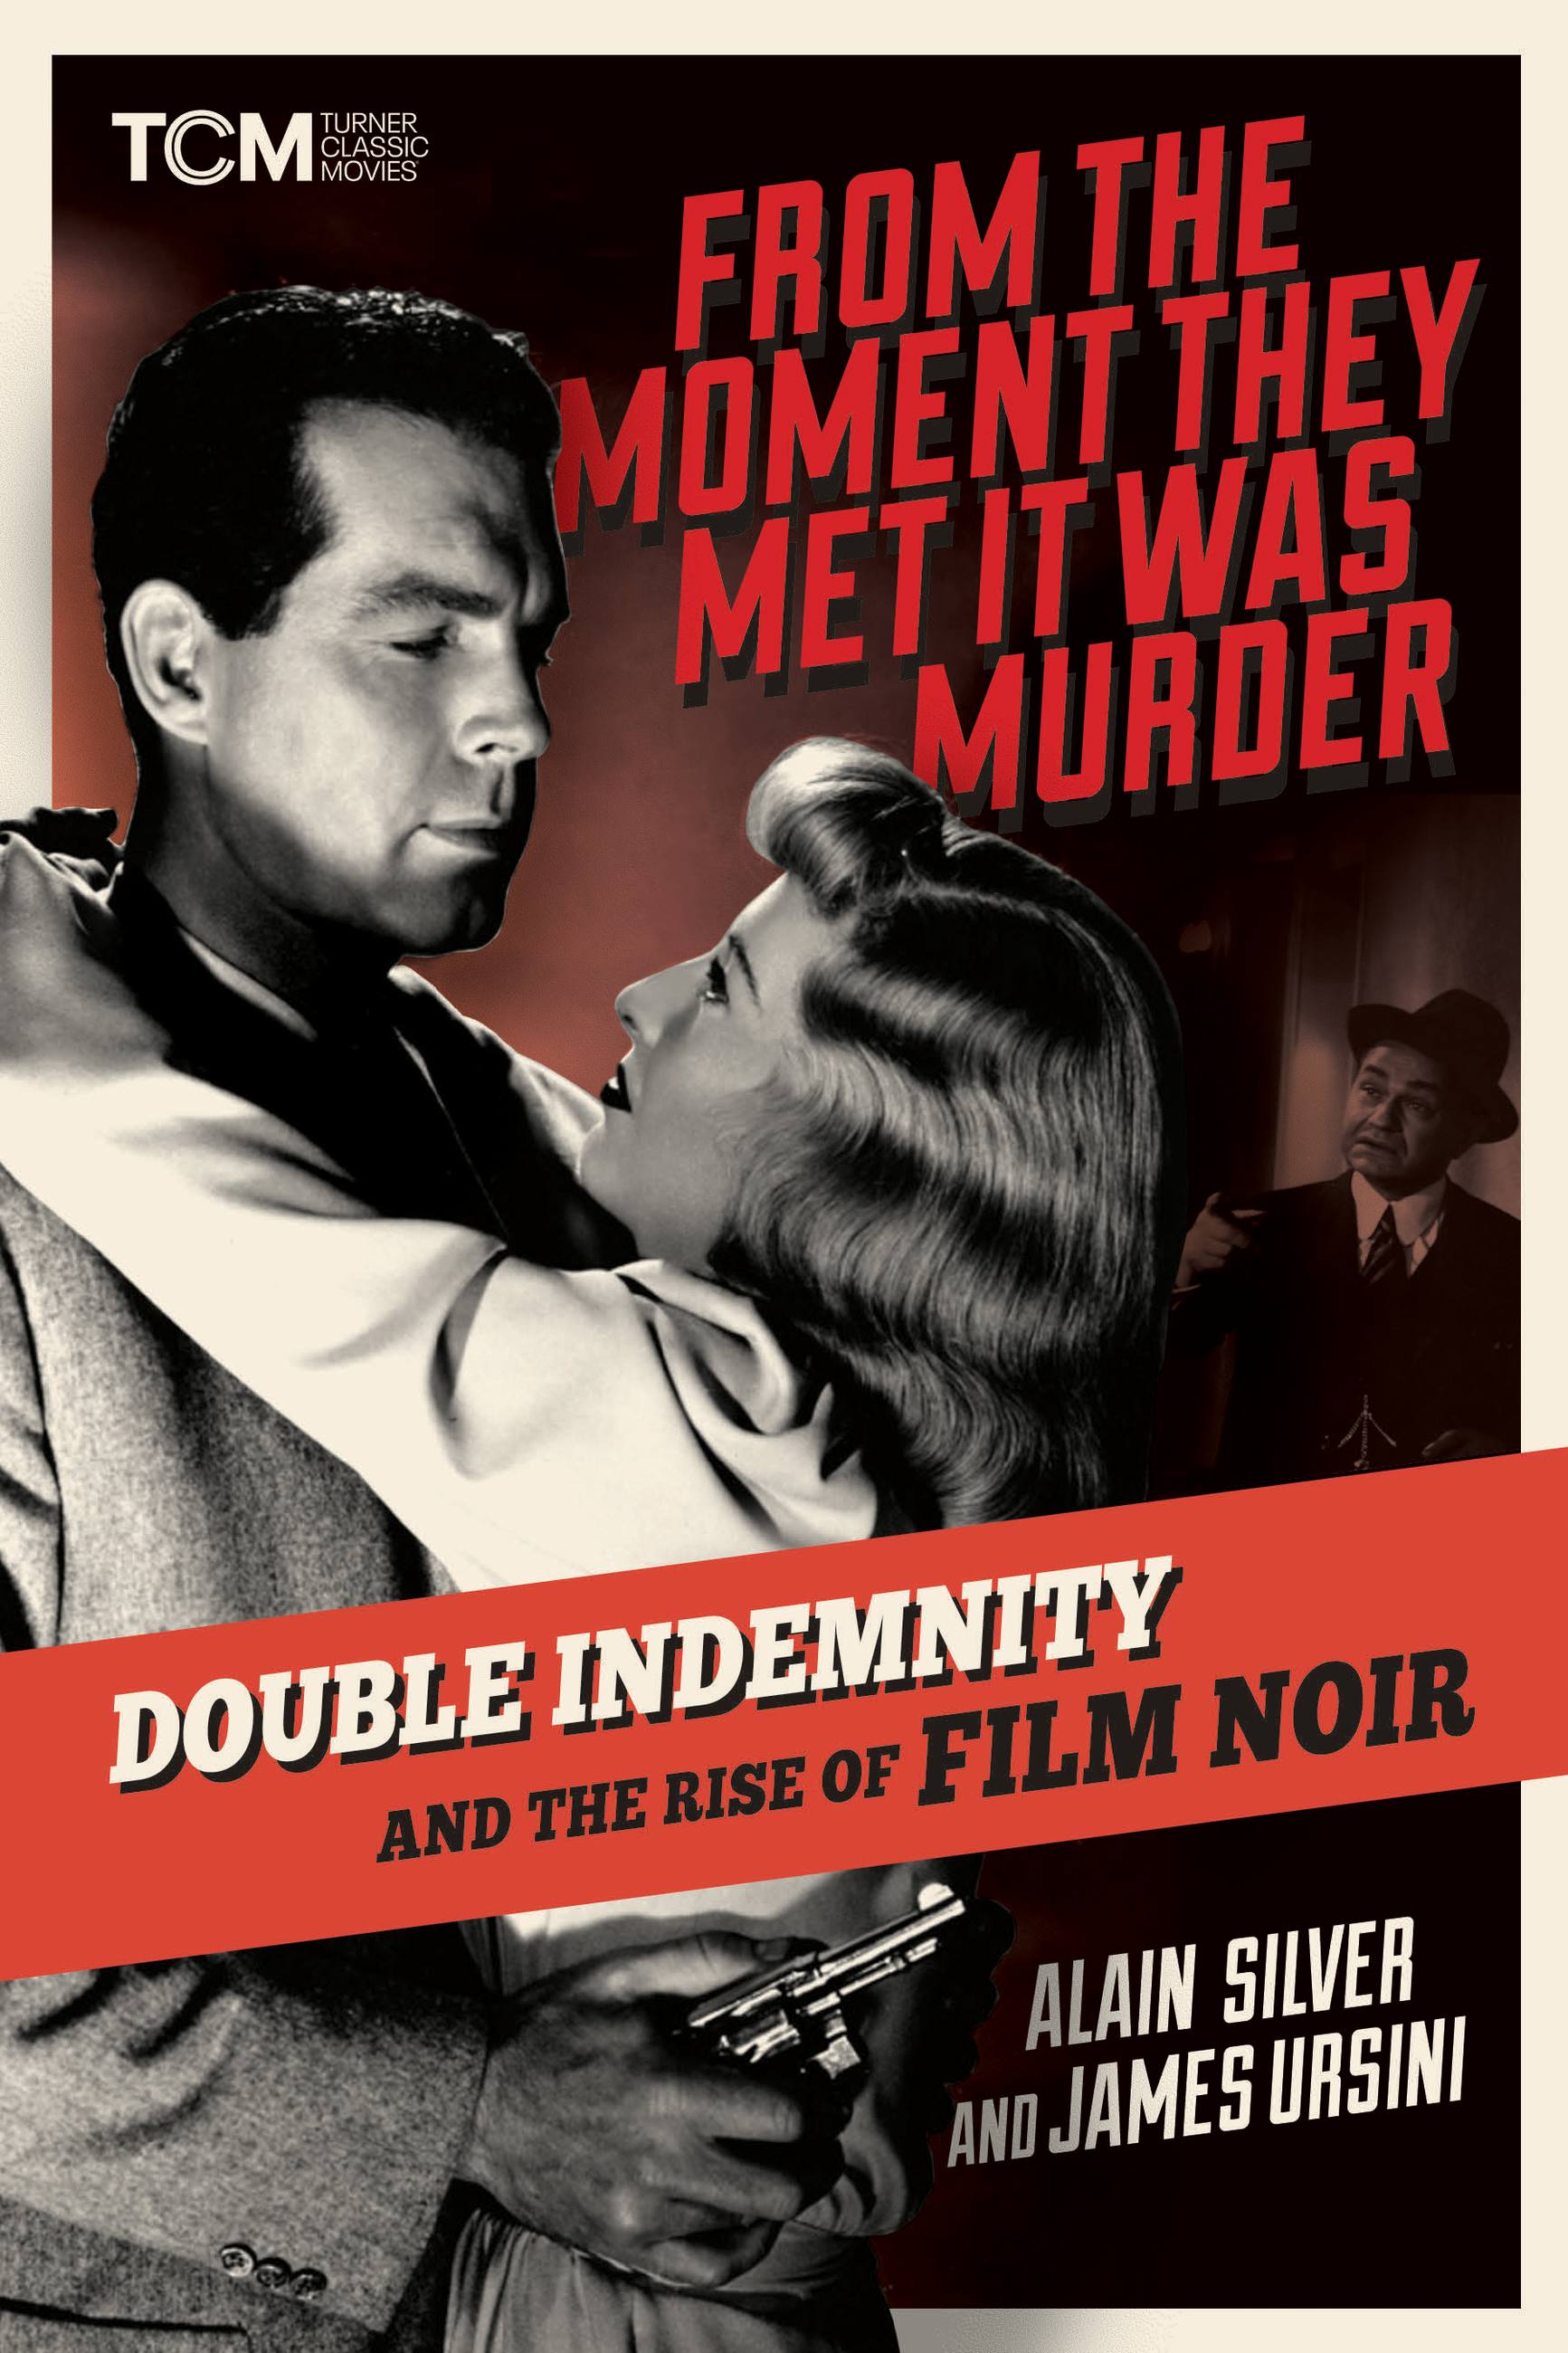 From the Moment They Met It Was Murder by Alain Silver